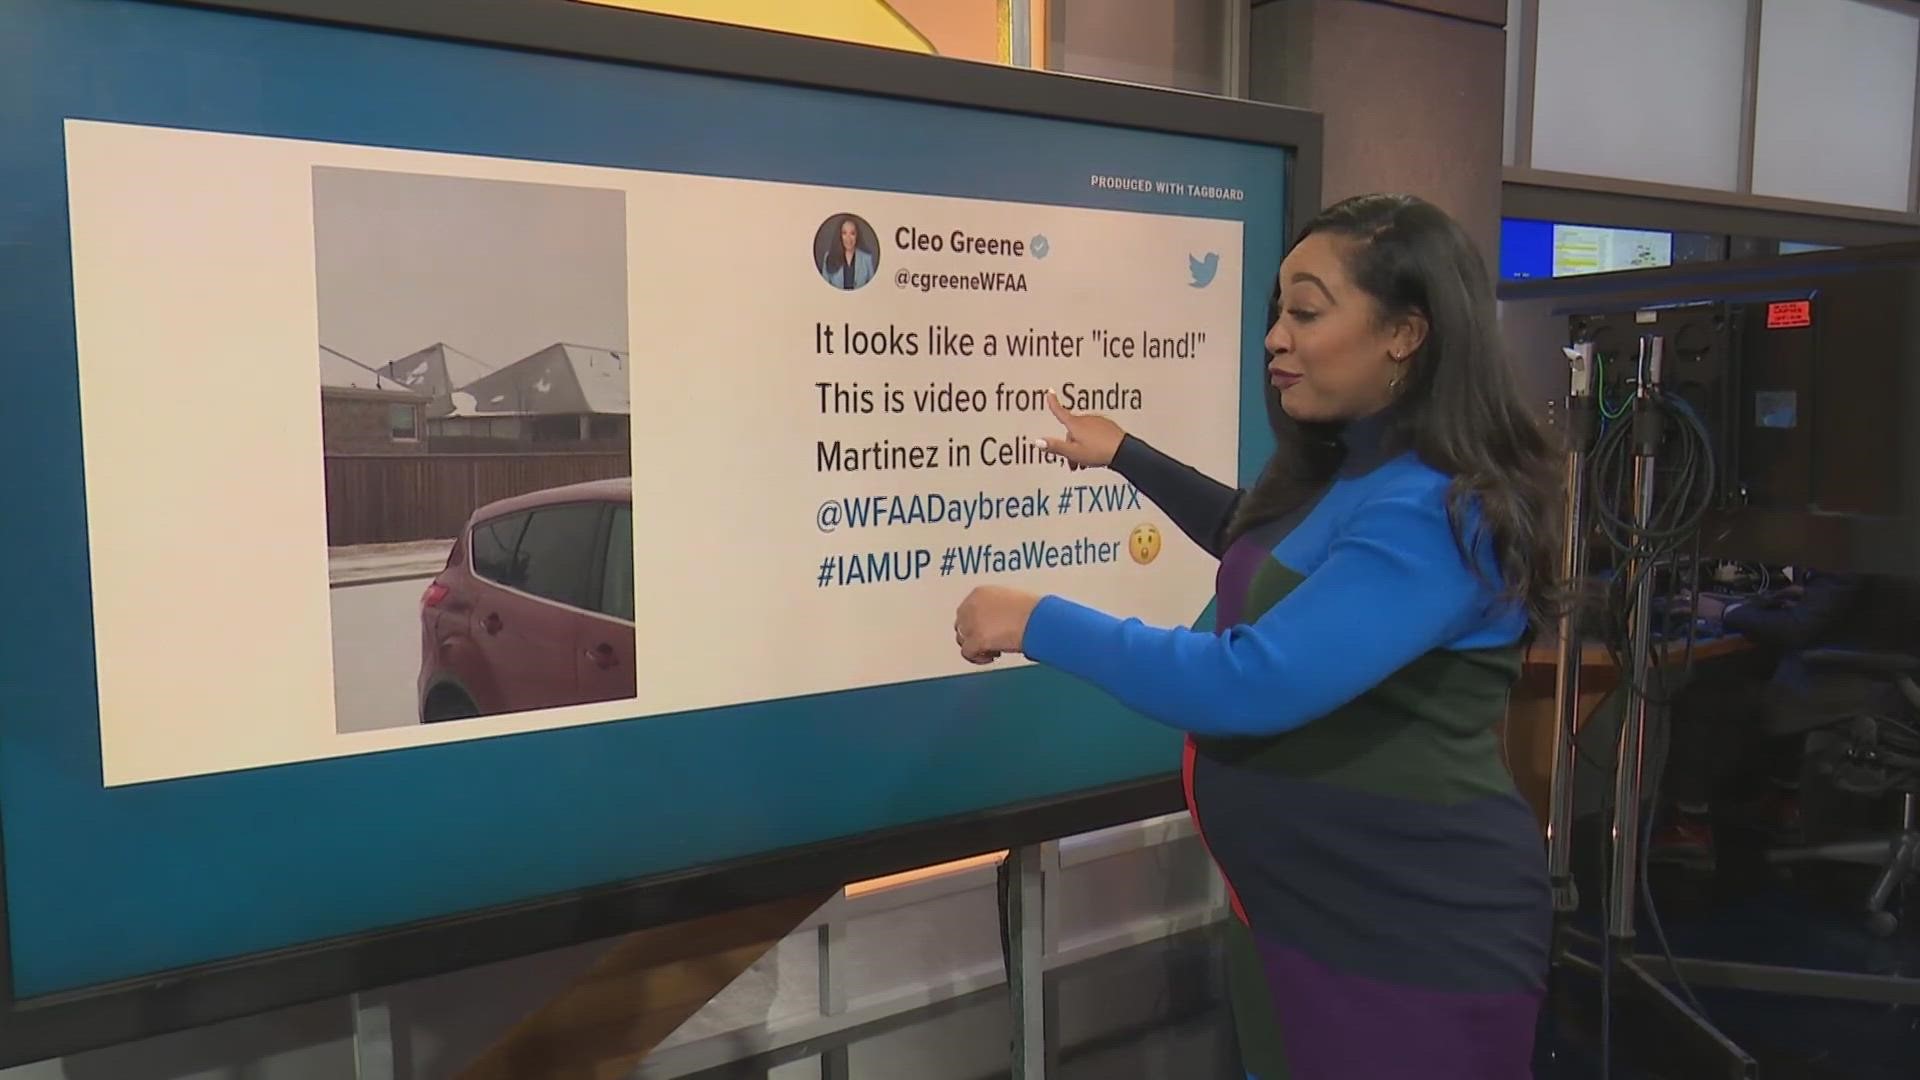 WFAA's Cleo Greene shares some of the viewer content shared with her in connection to the freezing conditions in North Texas.